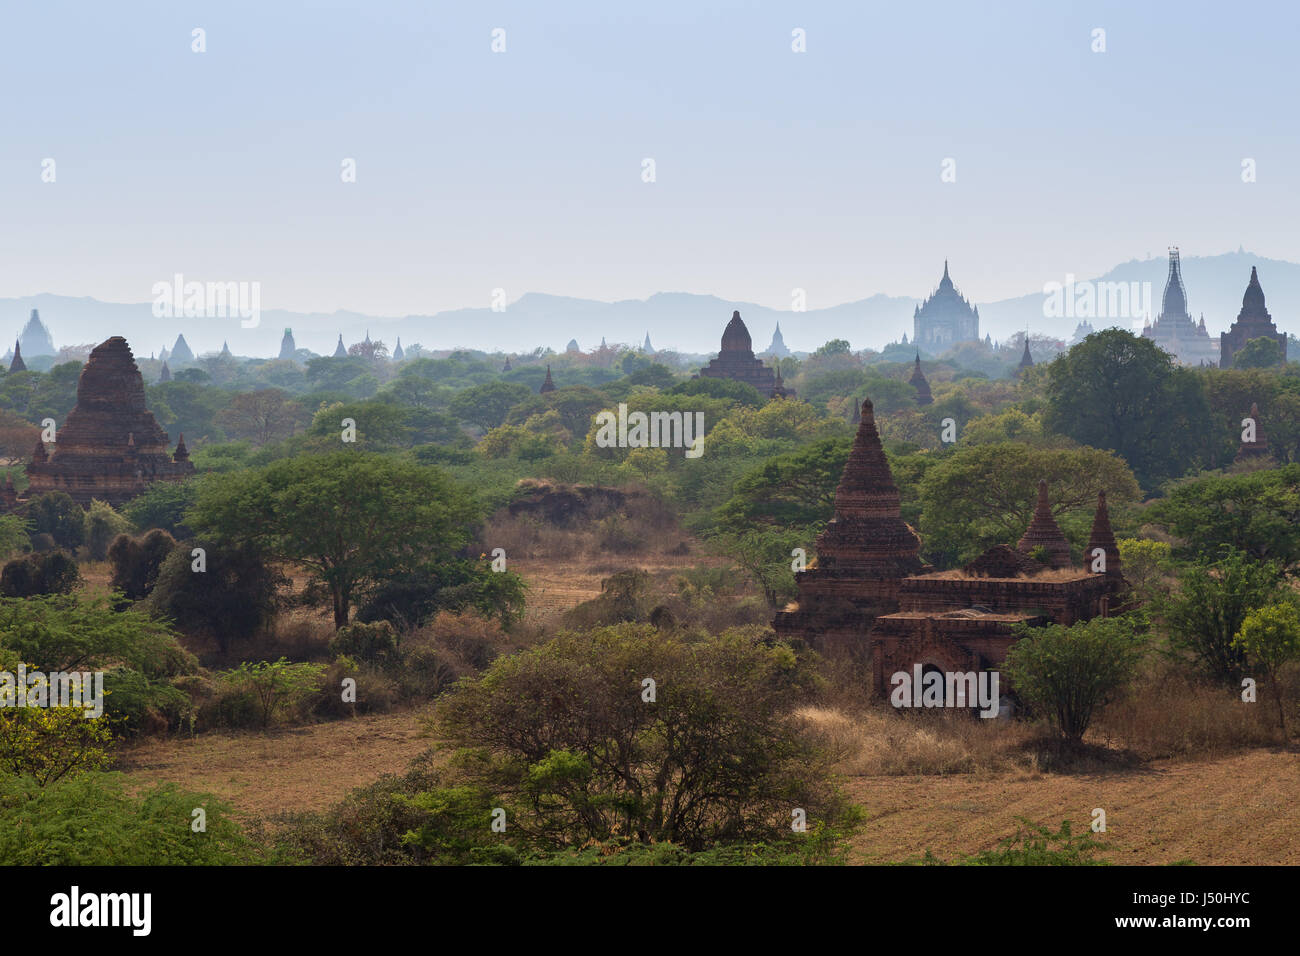 Scenic view of many temples and pagodas in the ancient plain of Bagan in Myanmar (Burma), viewed from the Bulethi (Buledi) Temple. Stock Photo